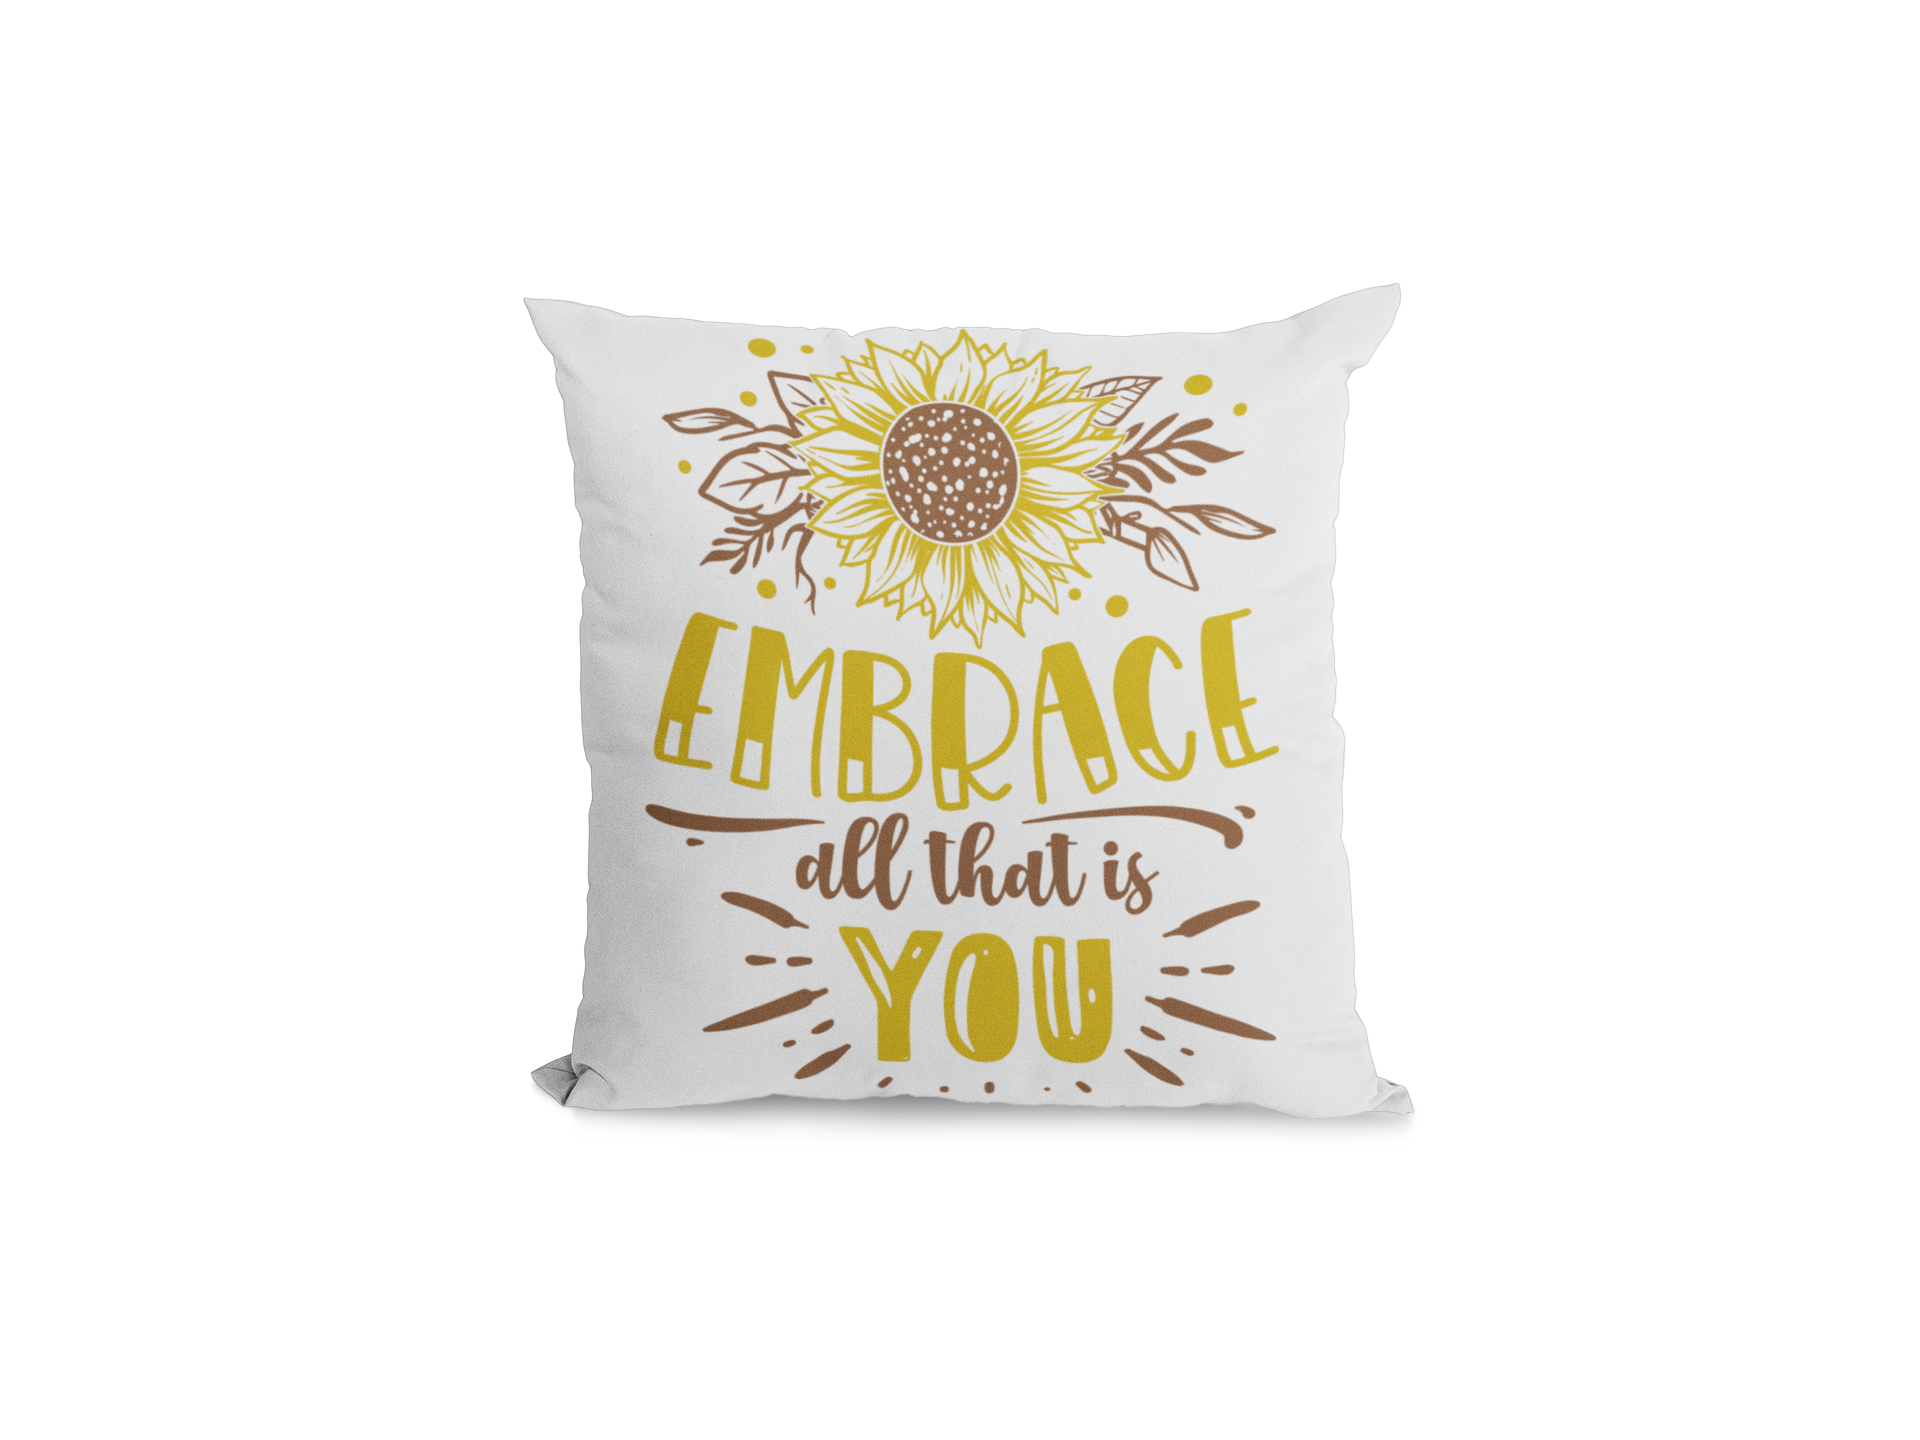 Motivational Quotes "Embrace All that is You" Satin Cushion Covers